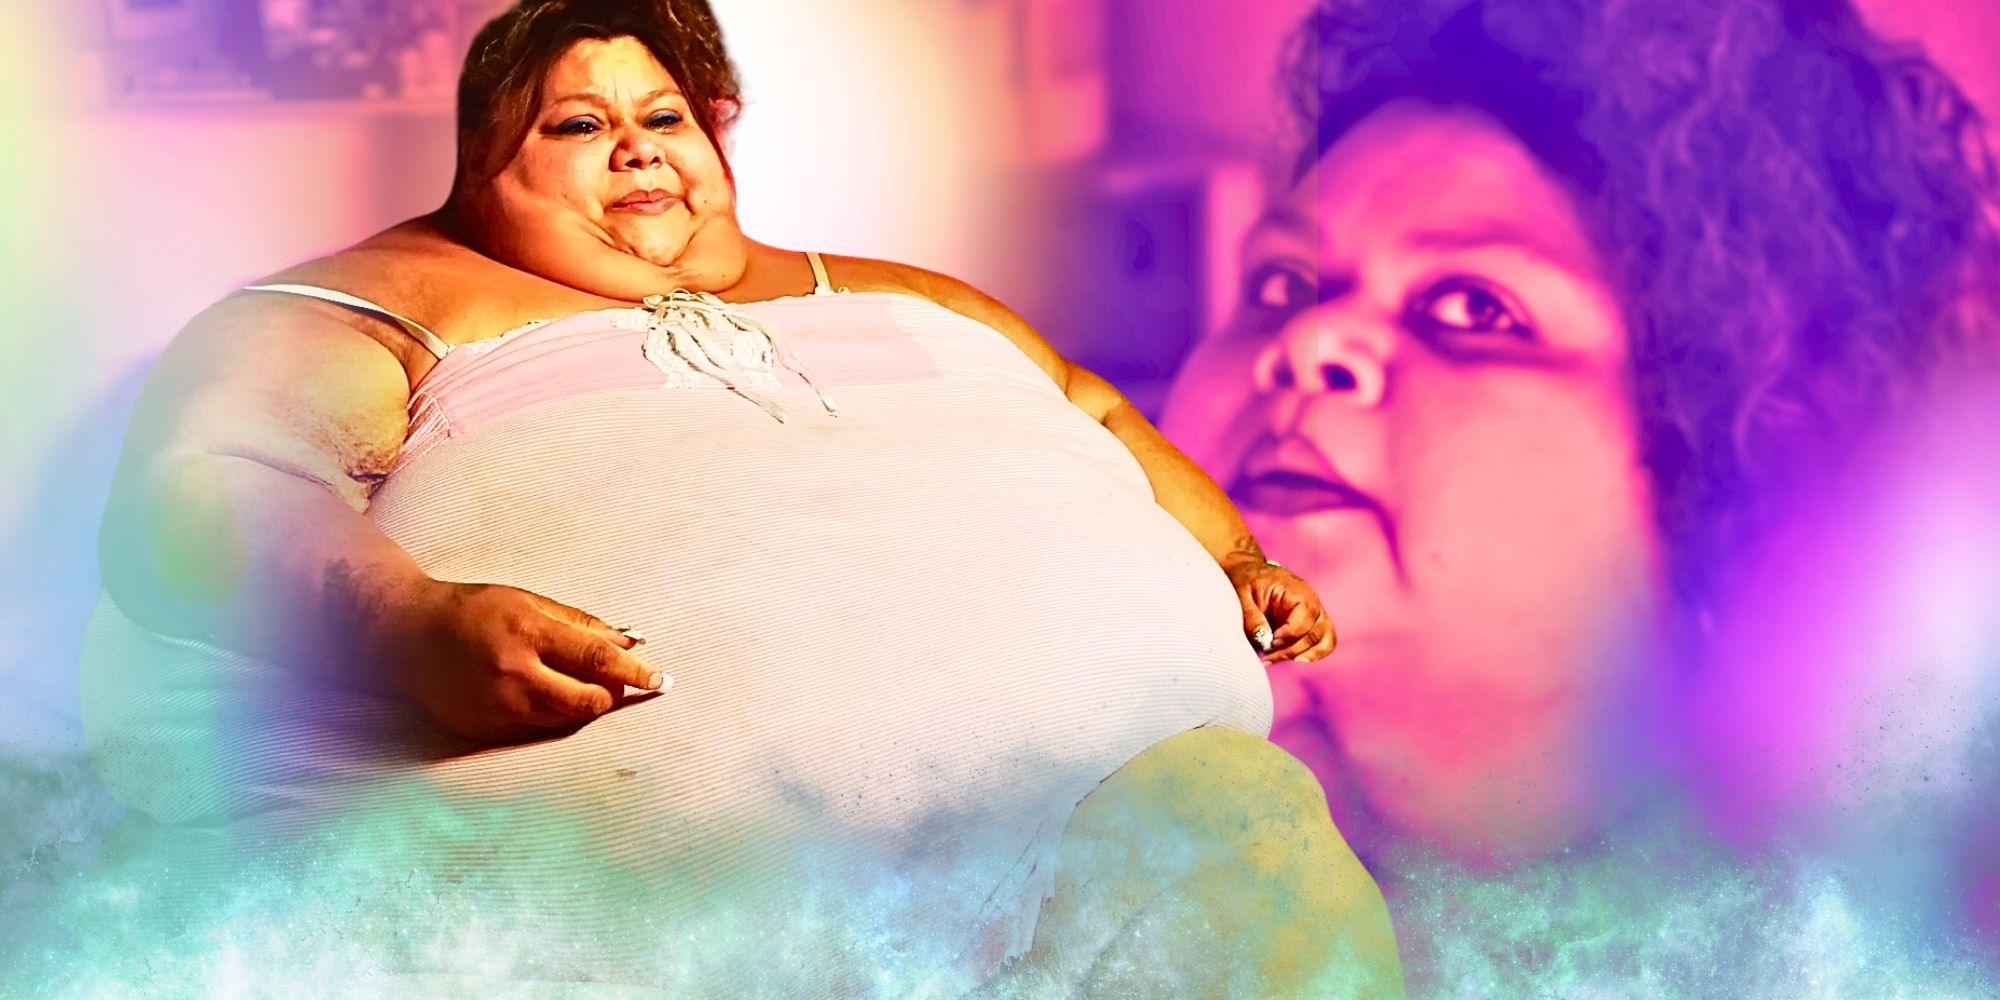 What Happened To Lupe Samano From My 600Lb Life Season 4 After The Show